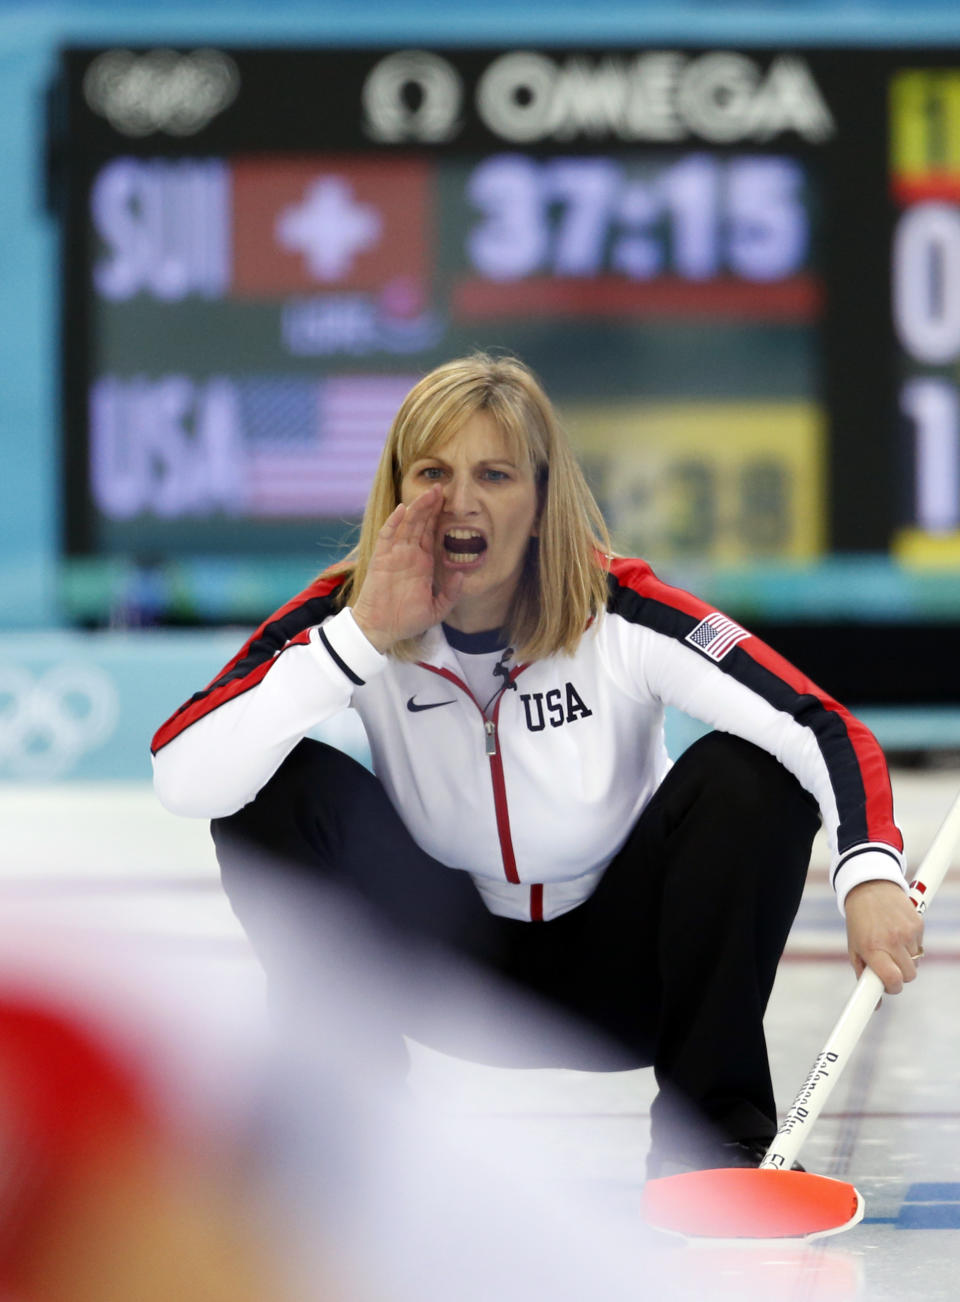 Team USA’s skip Erika Brown shouts instructions to her teammates after delivering the rock during women's curling competition against Switzerland at the 2014 Winter Olympics, Monday, Feb. 10, 2014, in Sochi, Russia. (AP Photo/Robert F. Bukaty)